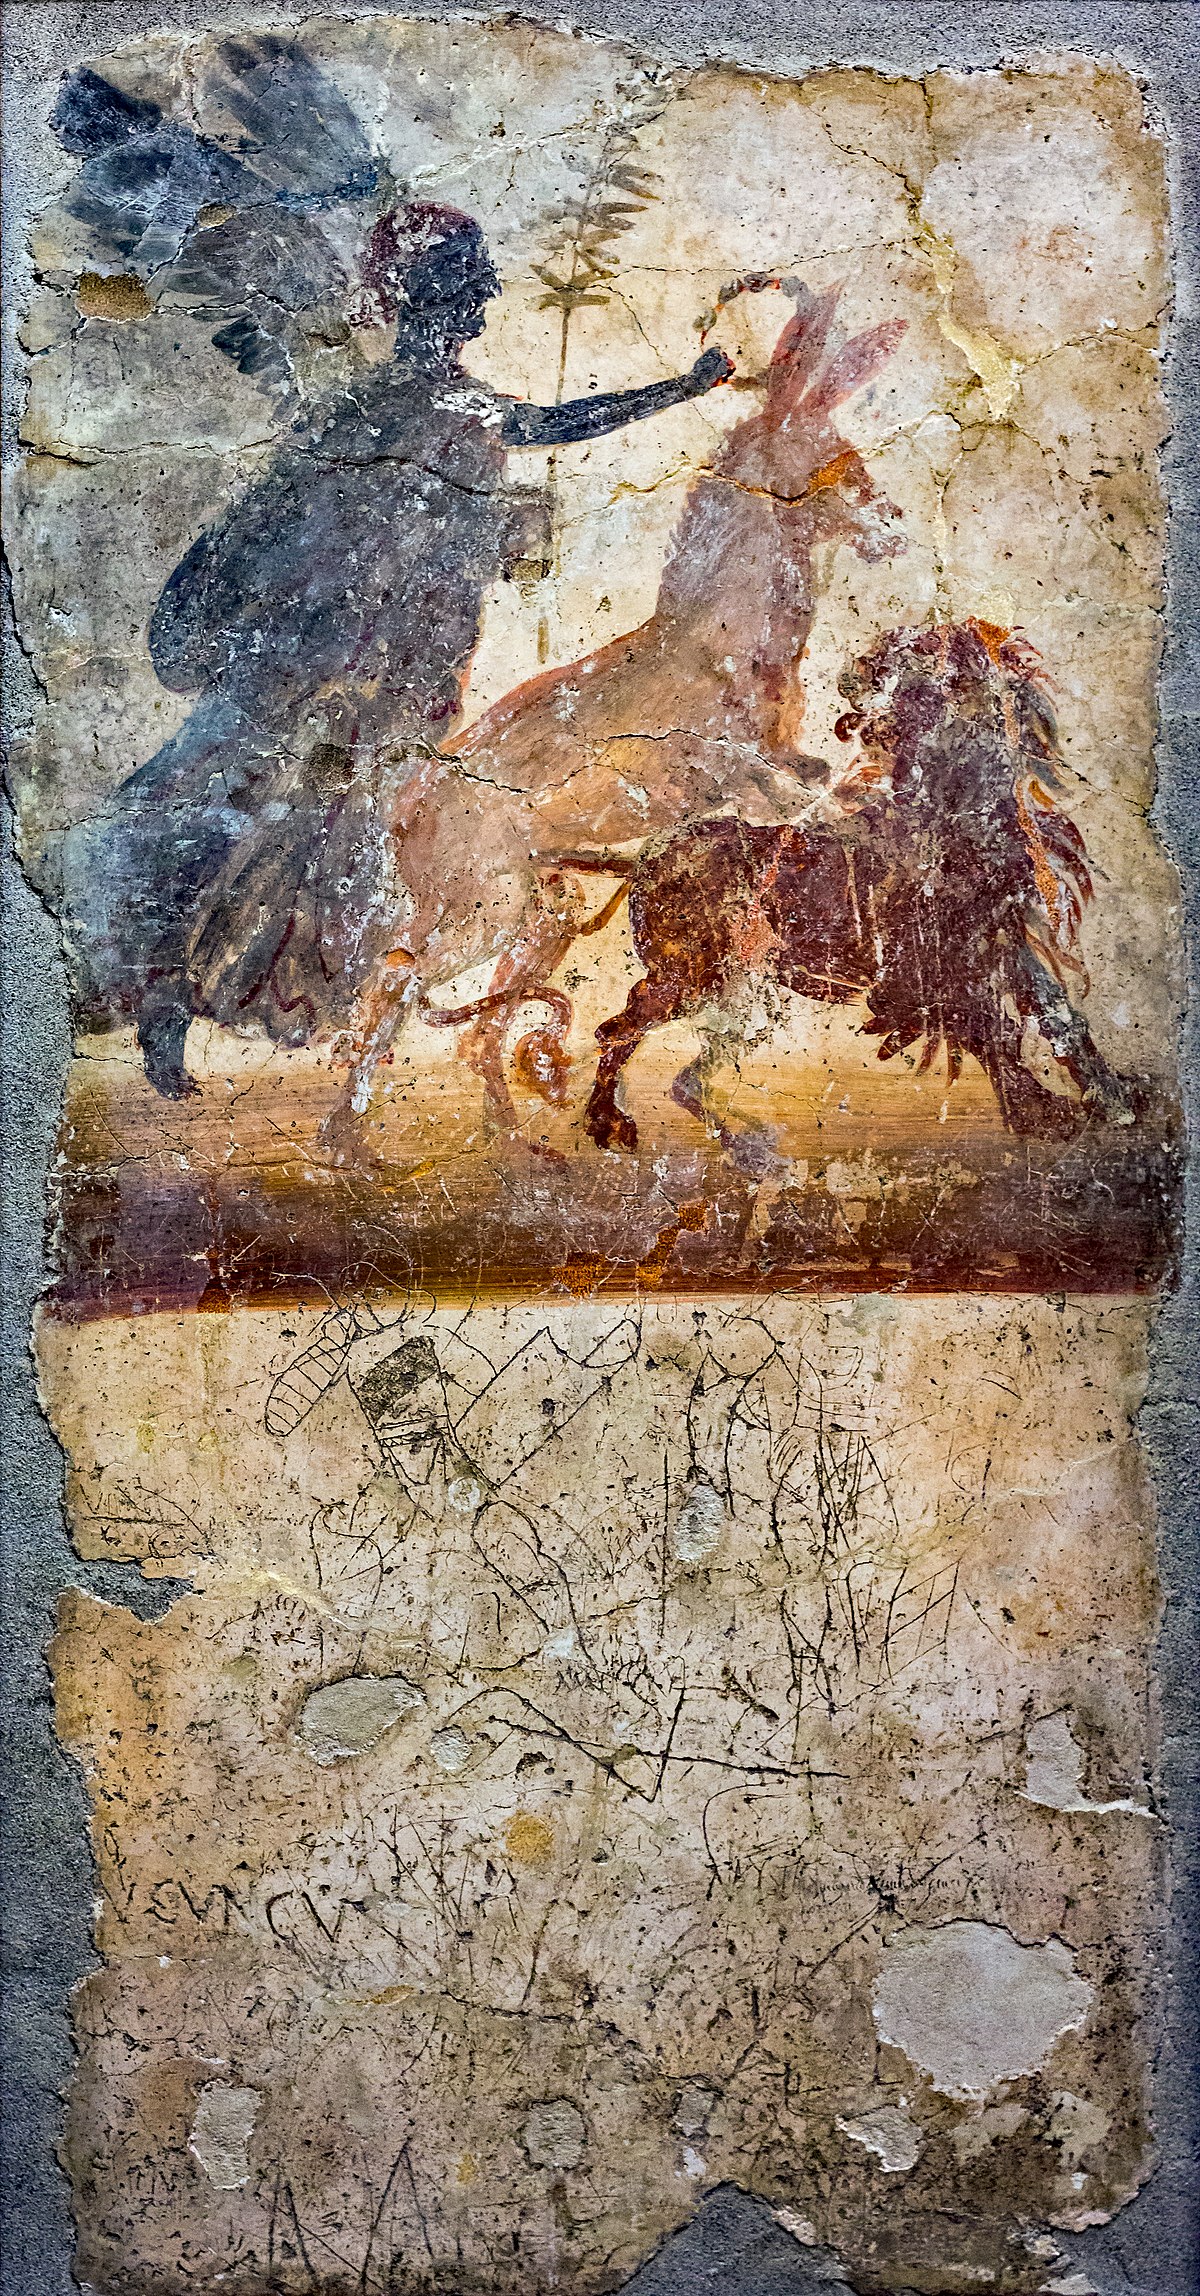 File:Wall painting - Nike crowning a donkey which penetrates a lion Pompeii (VII 6 34-35) - Napoli MAN 27683.jpg - Wikimedia Commons